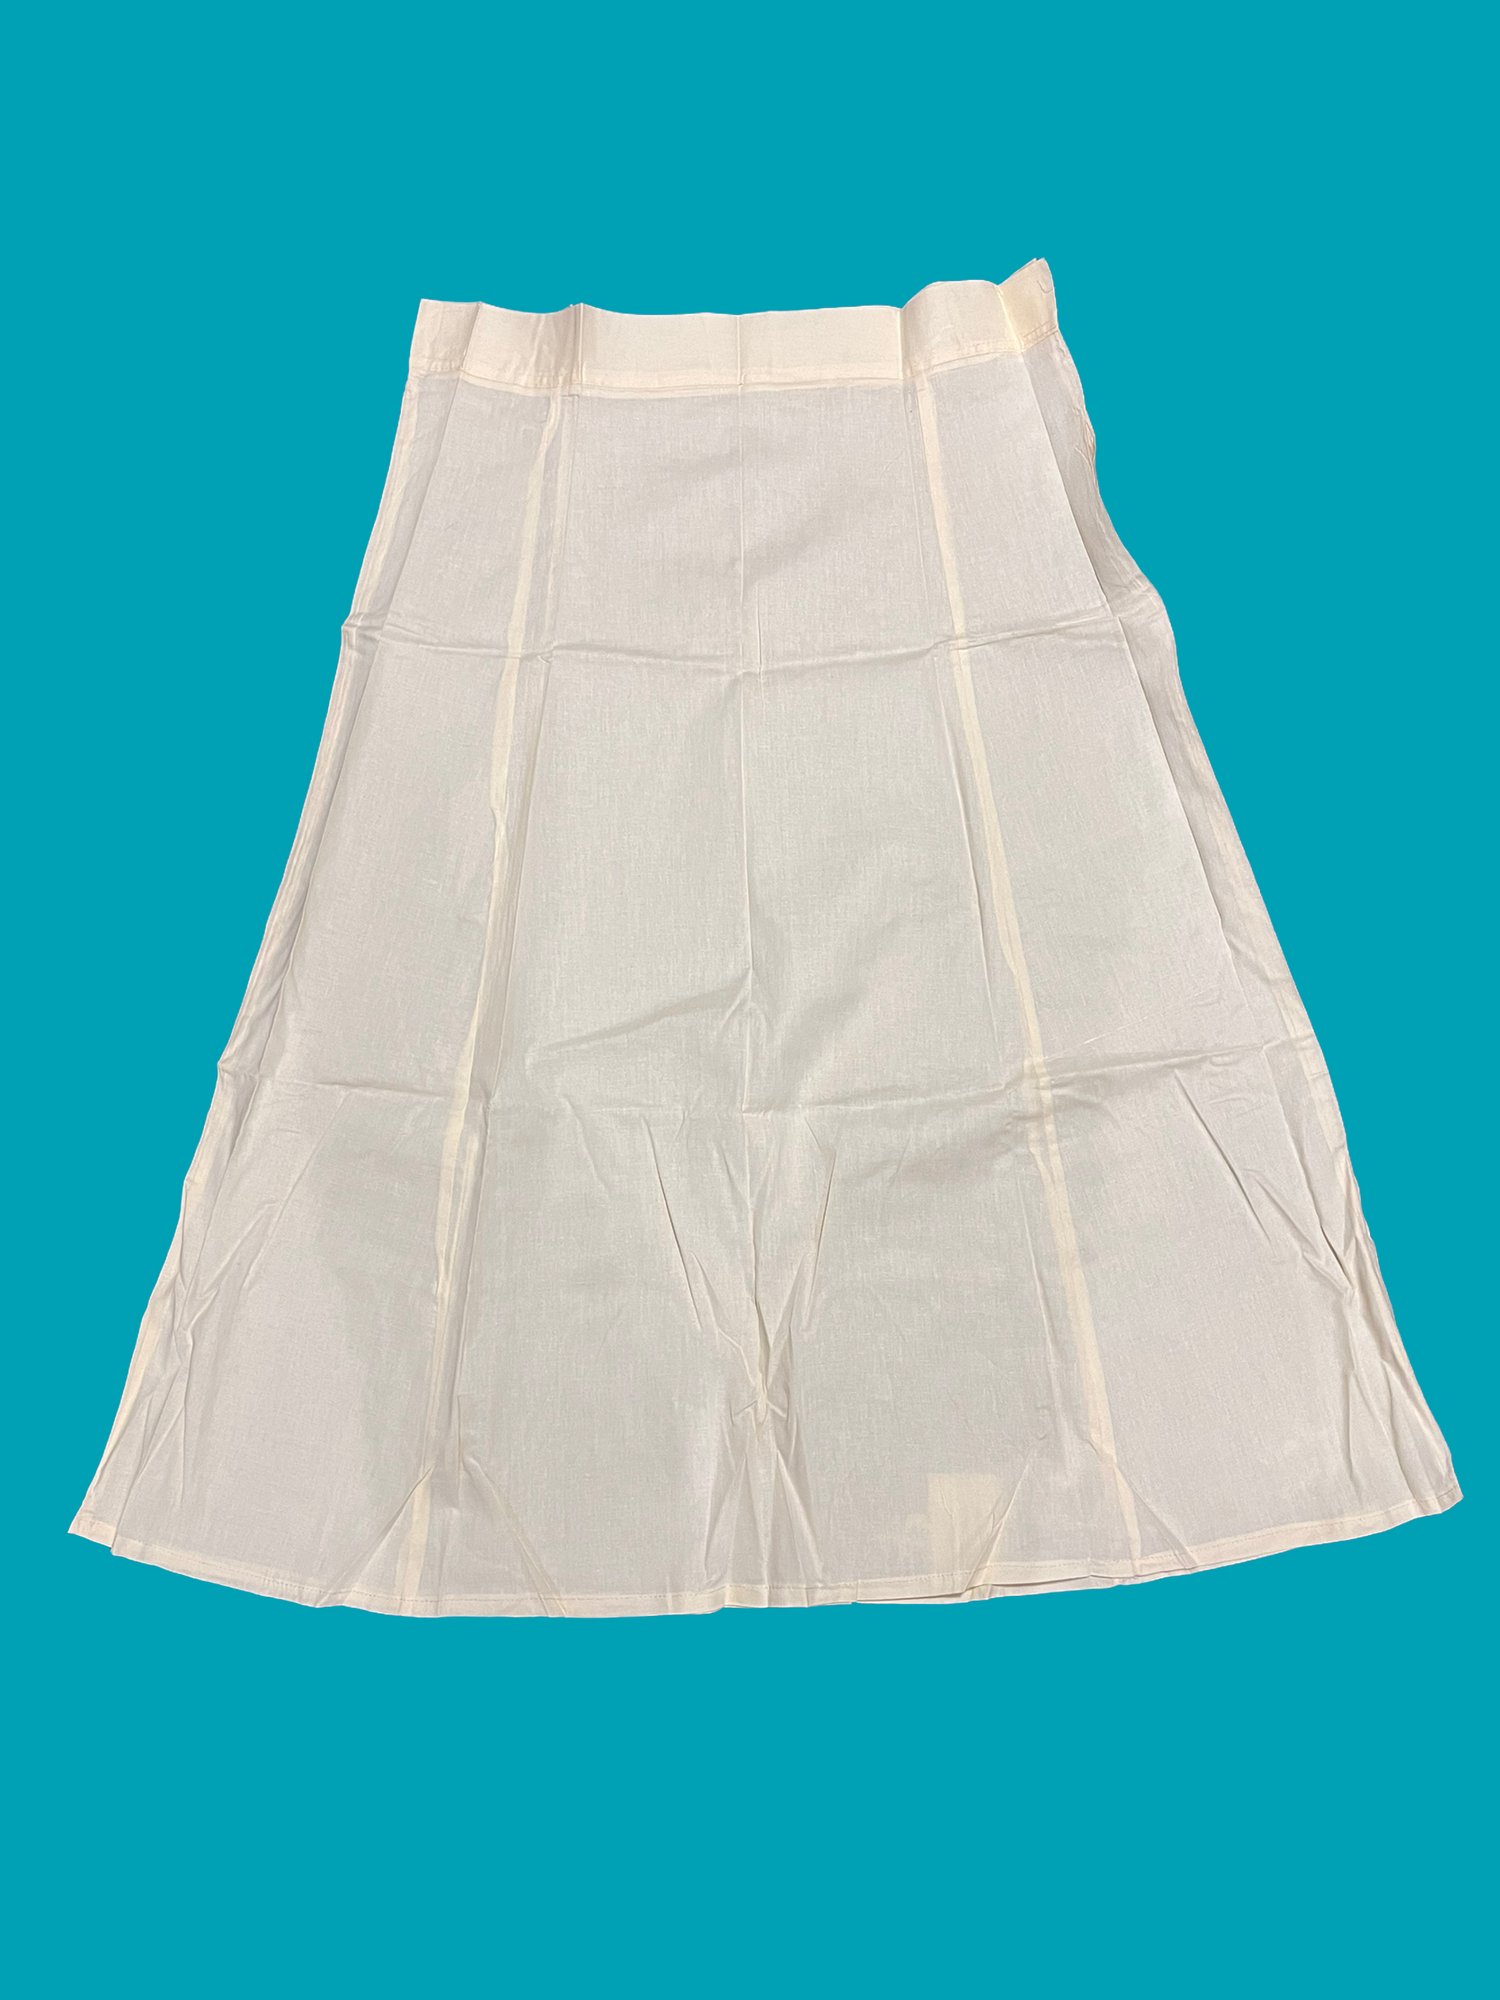 Cotton Petticoats - Buy Cotton Petticoats Online Starting at Just ₹120